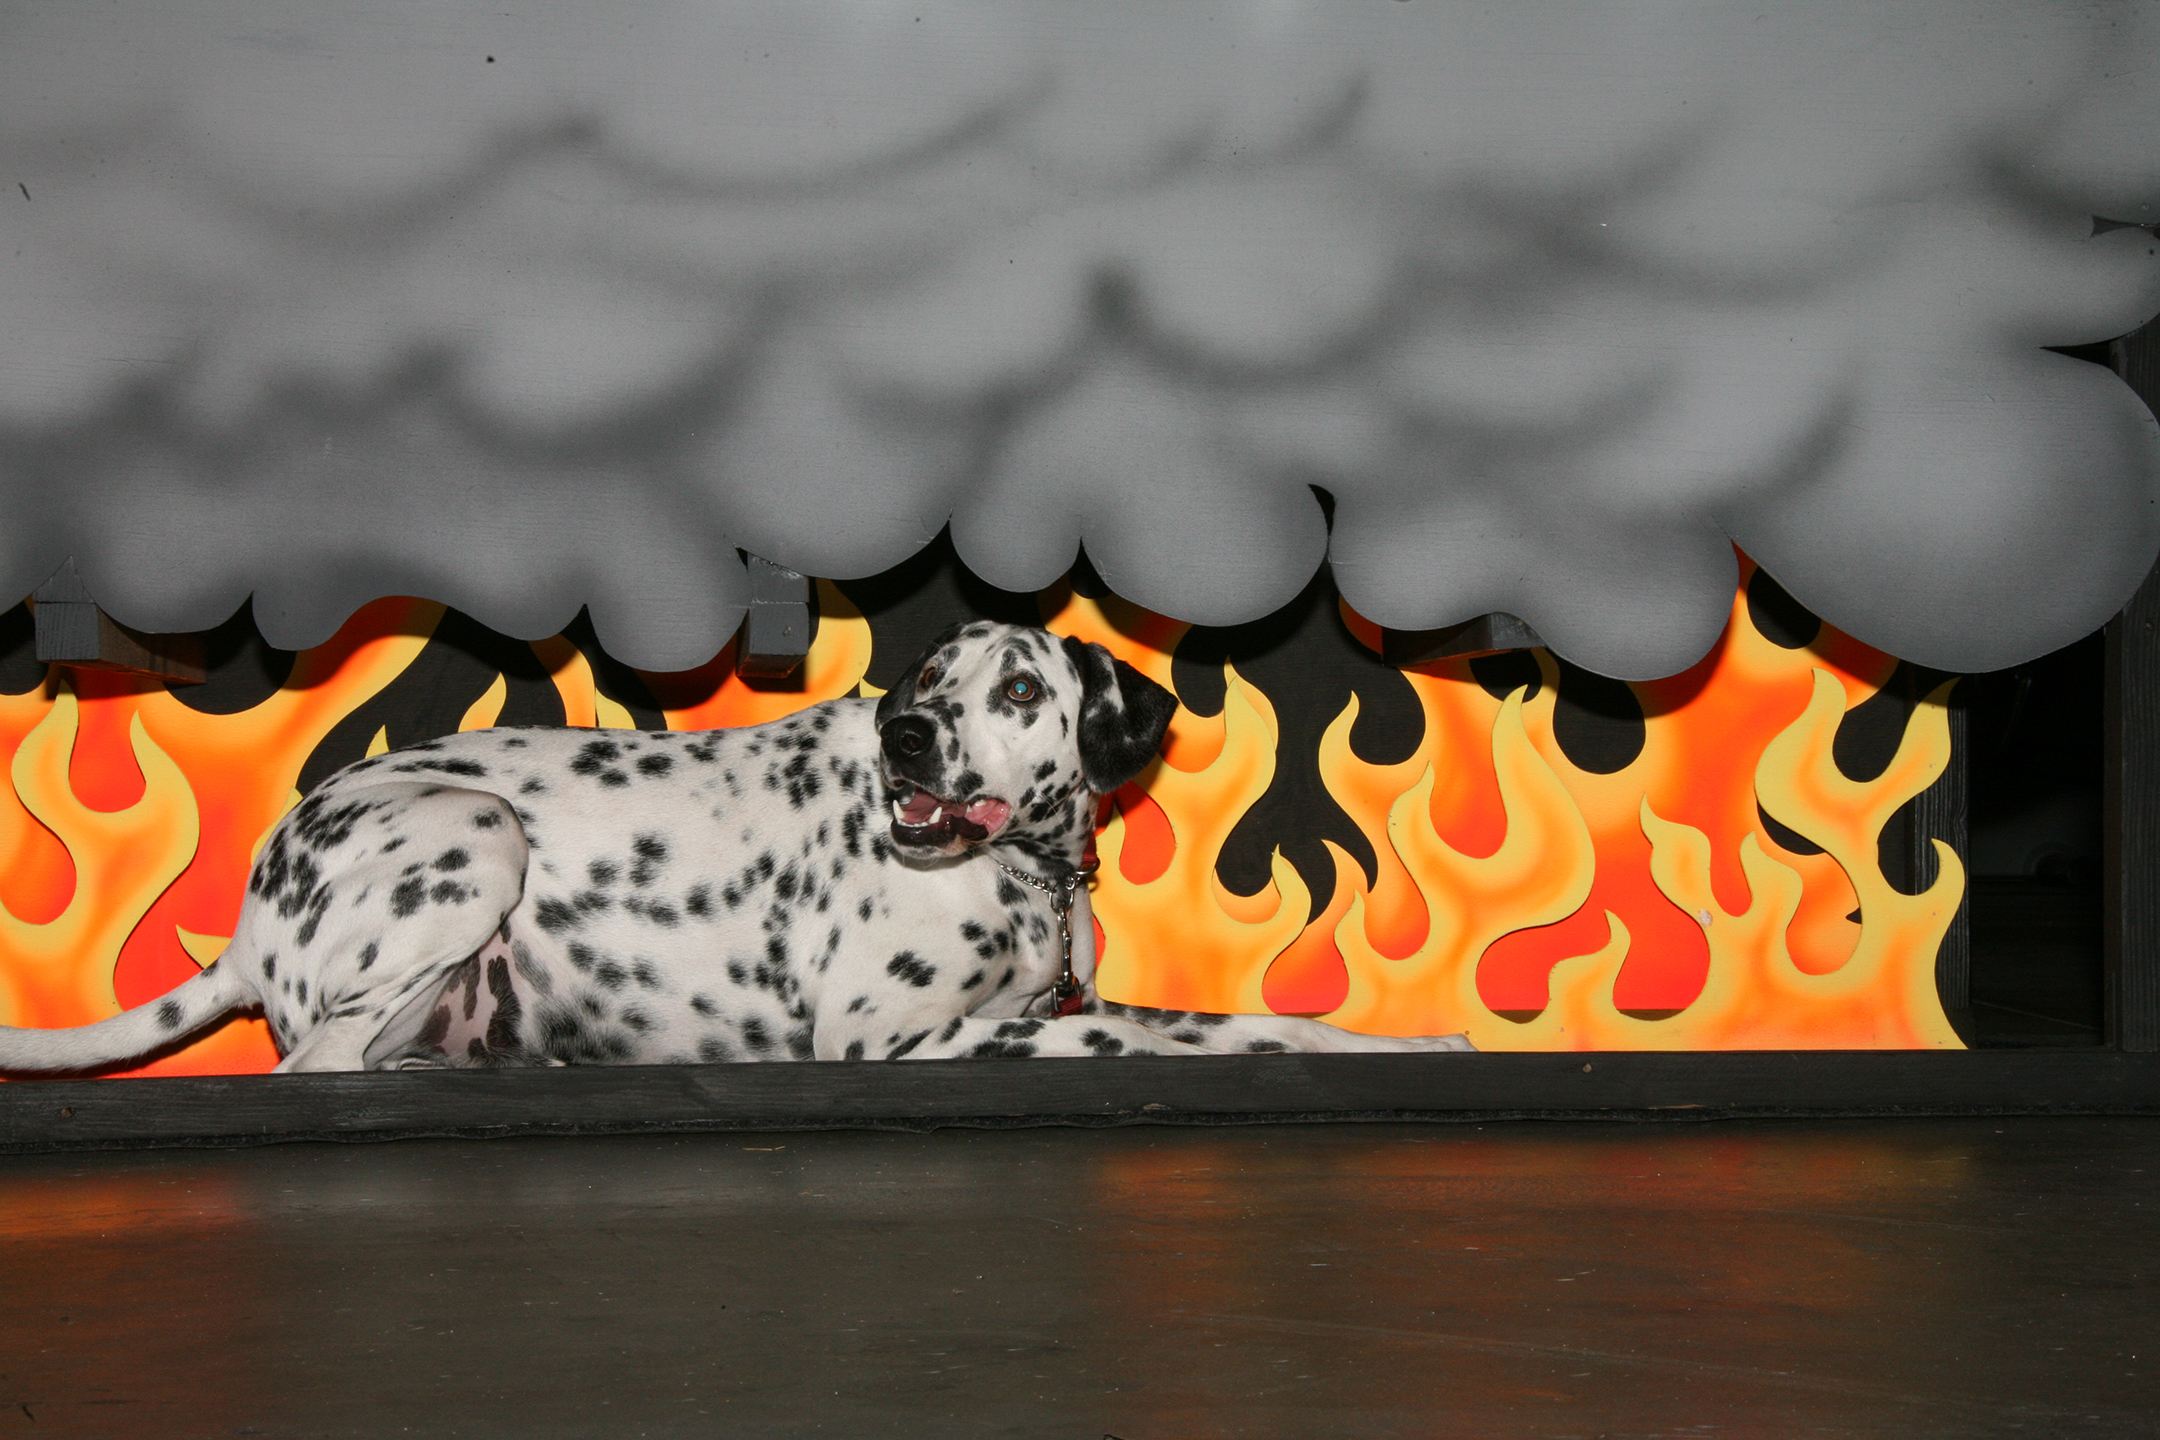 Wilshire the Fire Dog Teaches Fire Safety